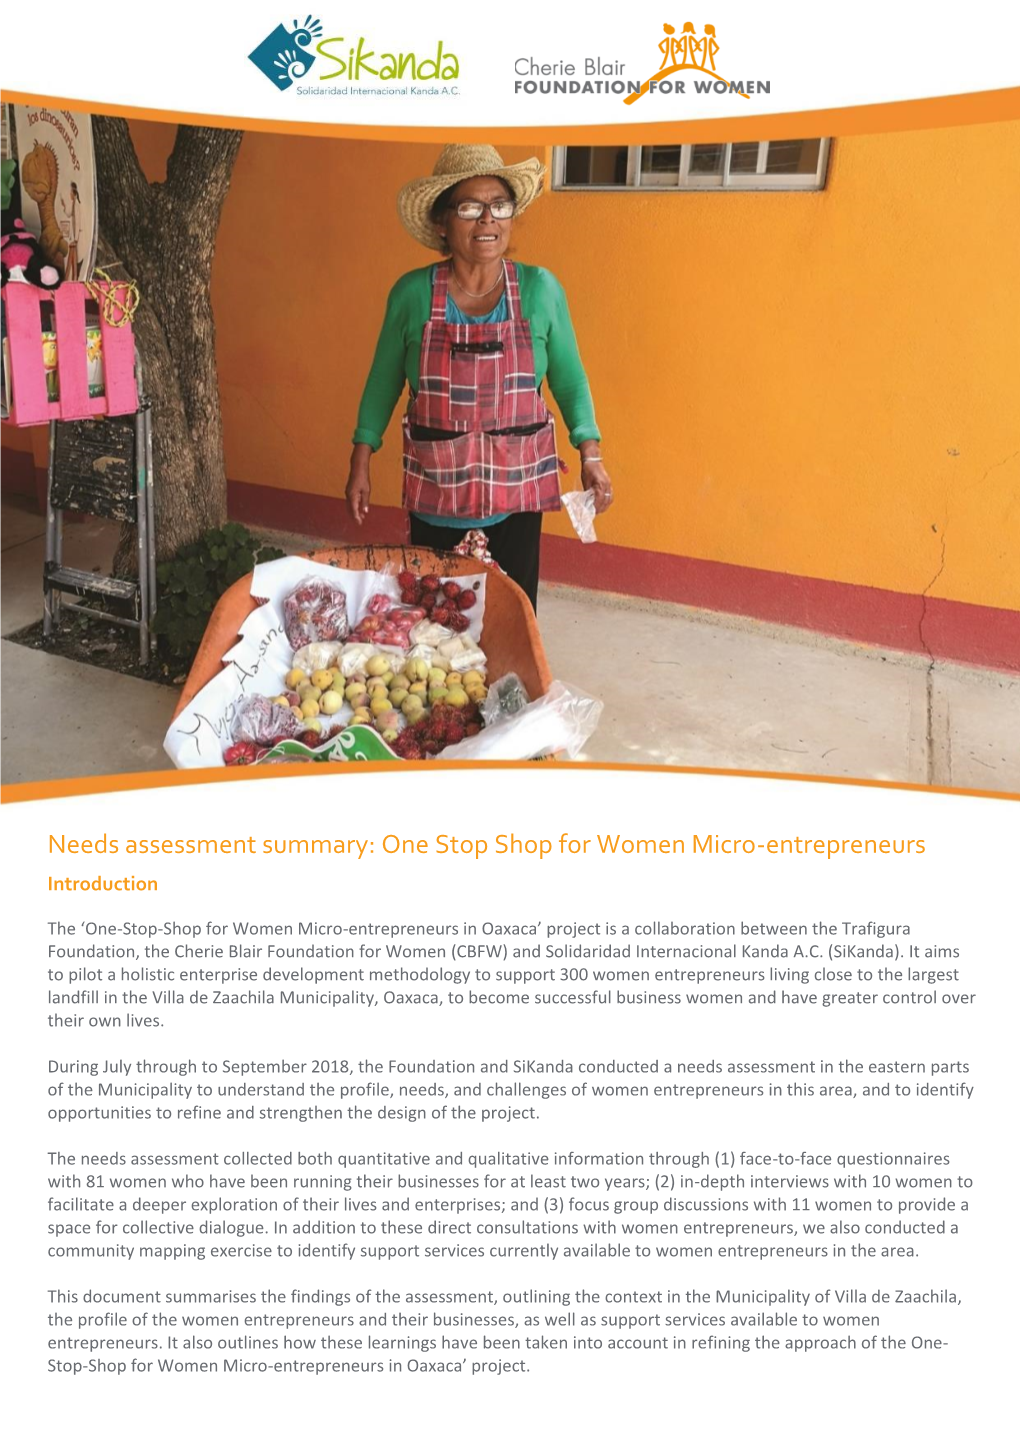 Needs Assessment Summary: One Stop Shop for Women Micro-Entrepreneurs Introduction